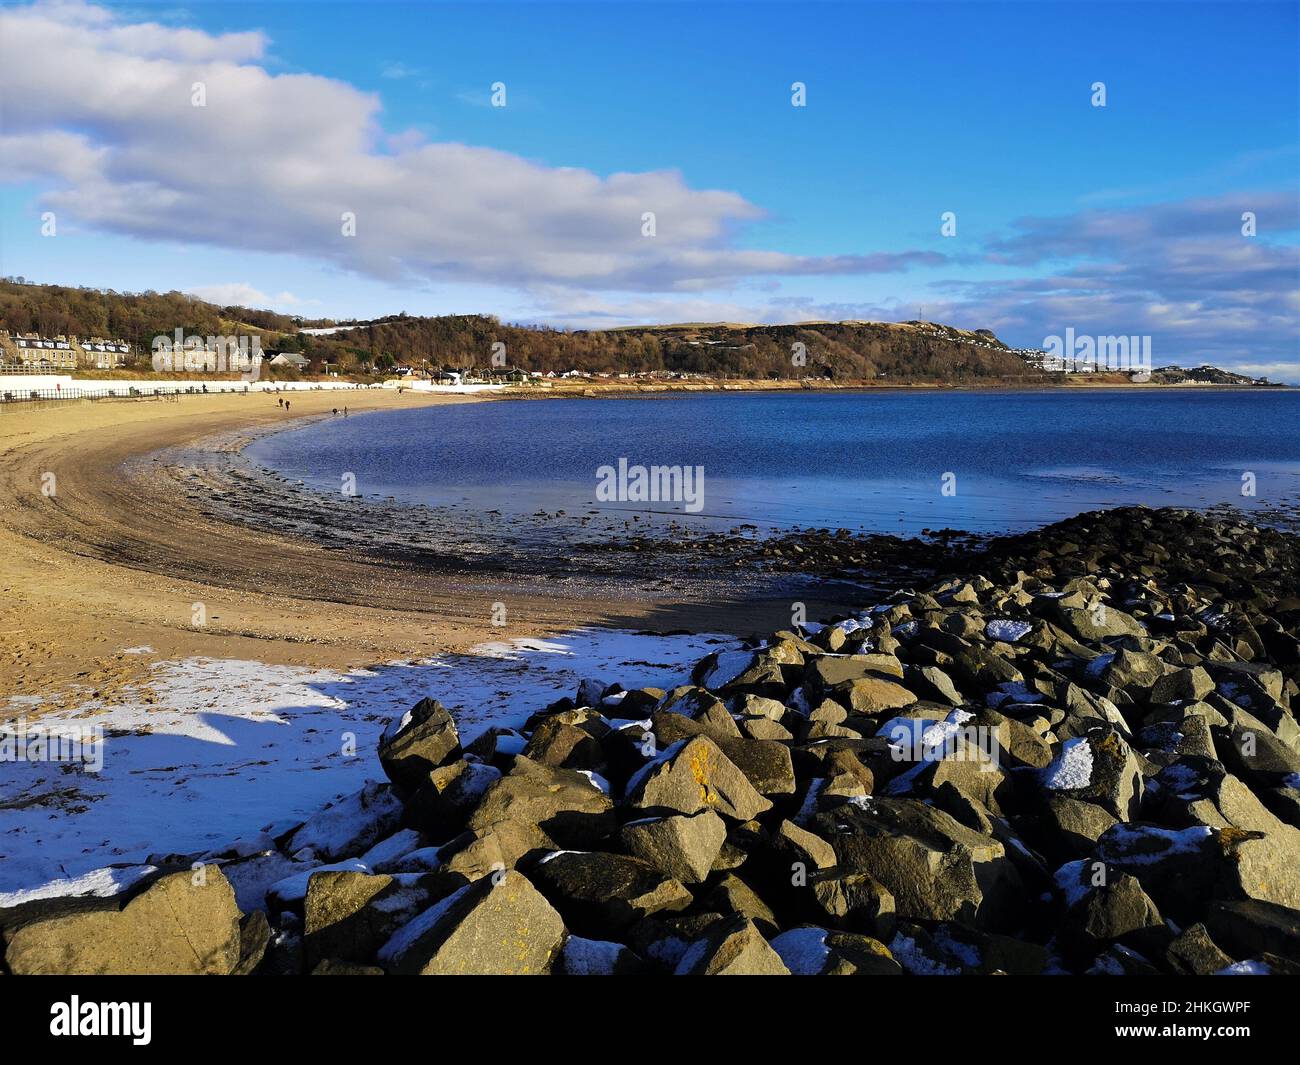 A view along the fine sandy beach in the Fife coastal town of Burntisland during a bright but cold winters day. Stock Photo